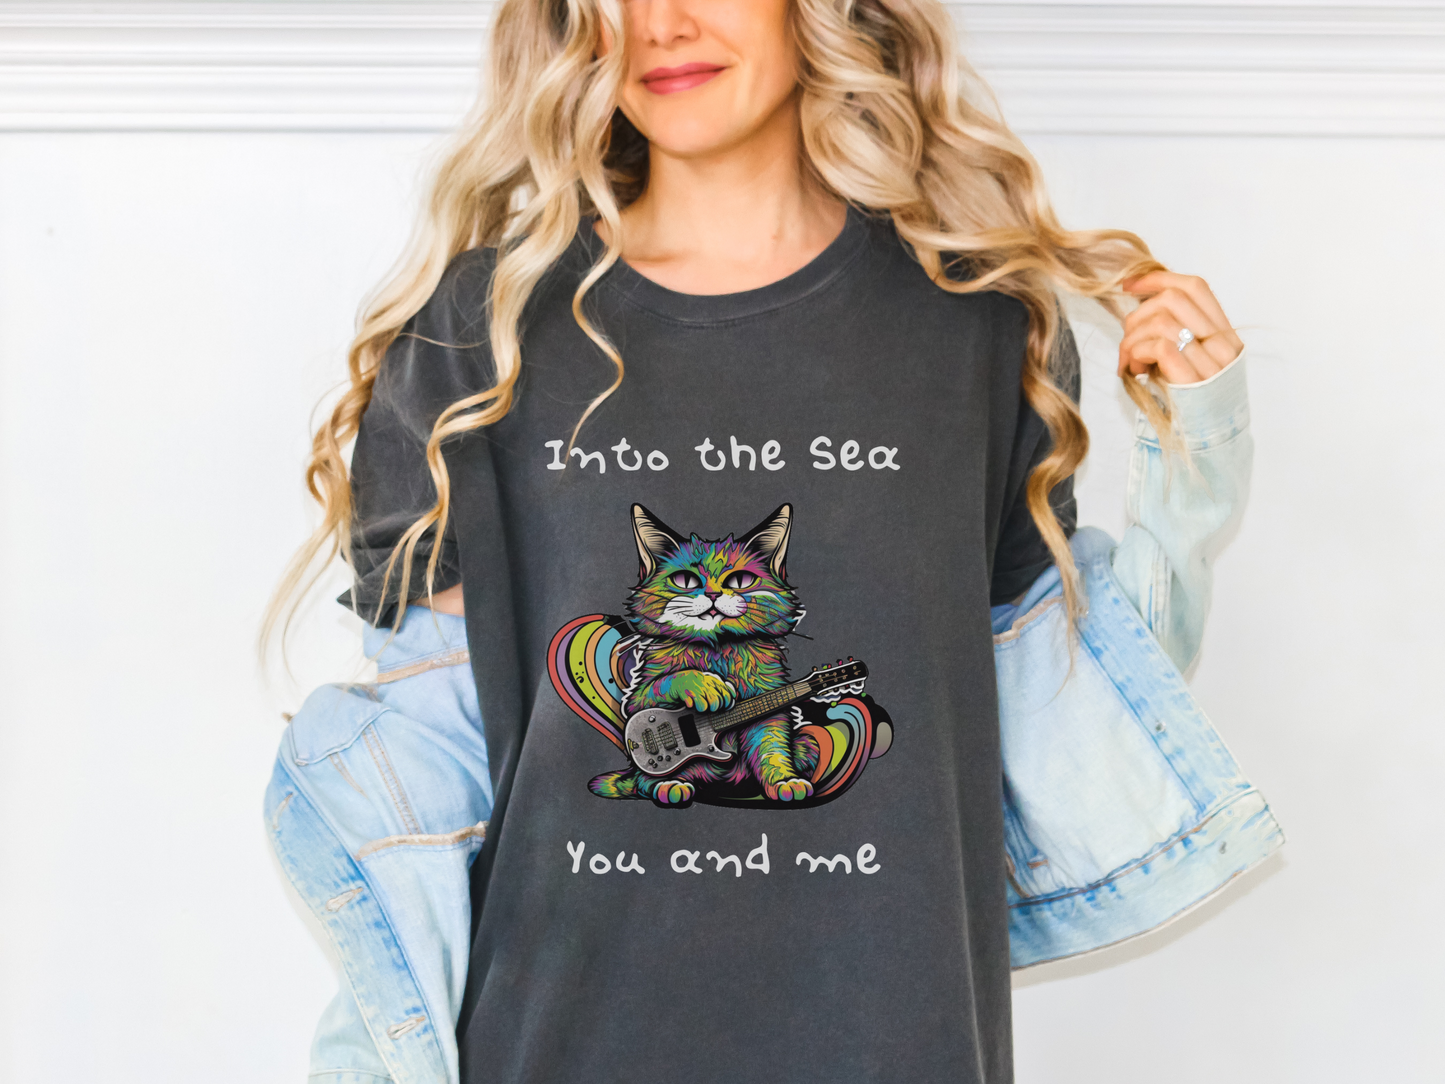 The Cure "Lovecats" T-Shirt in Pepper